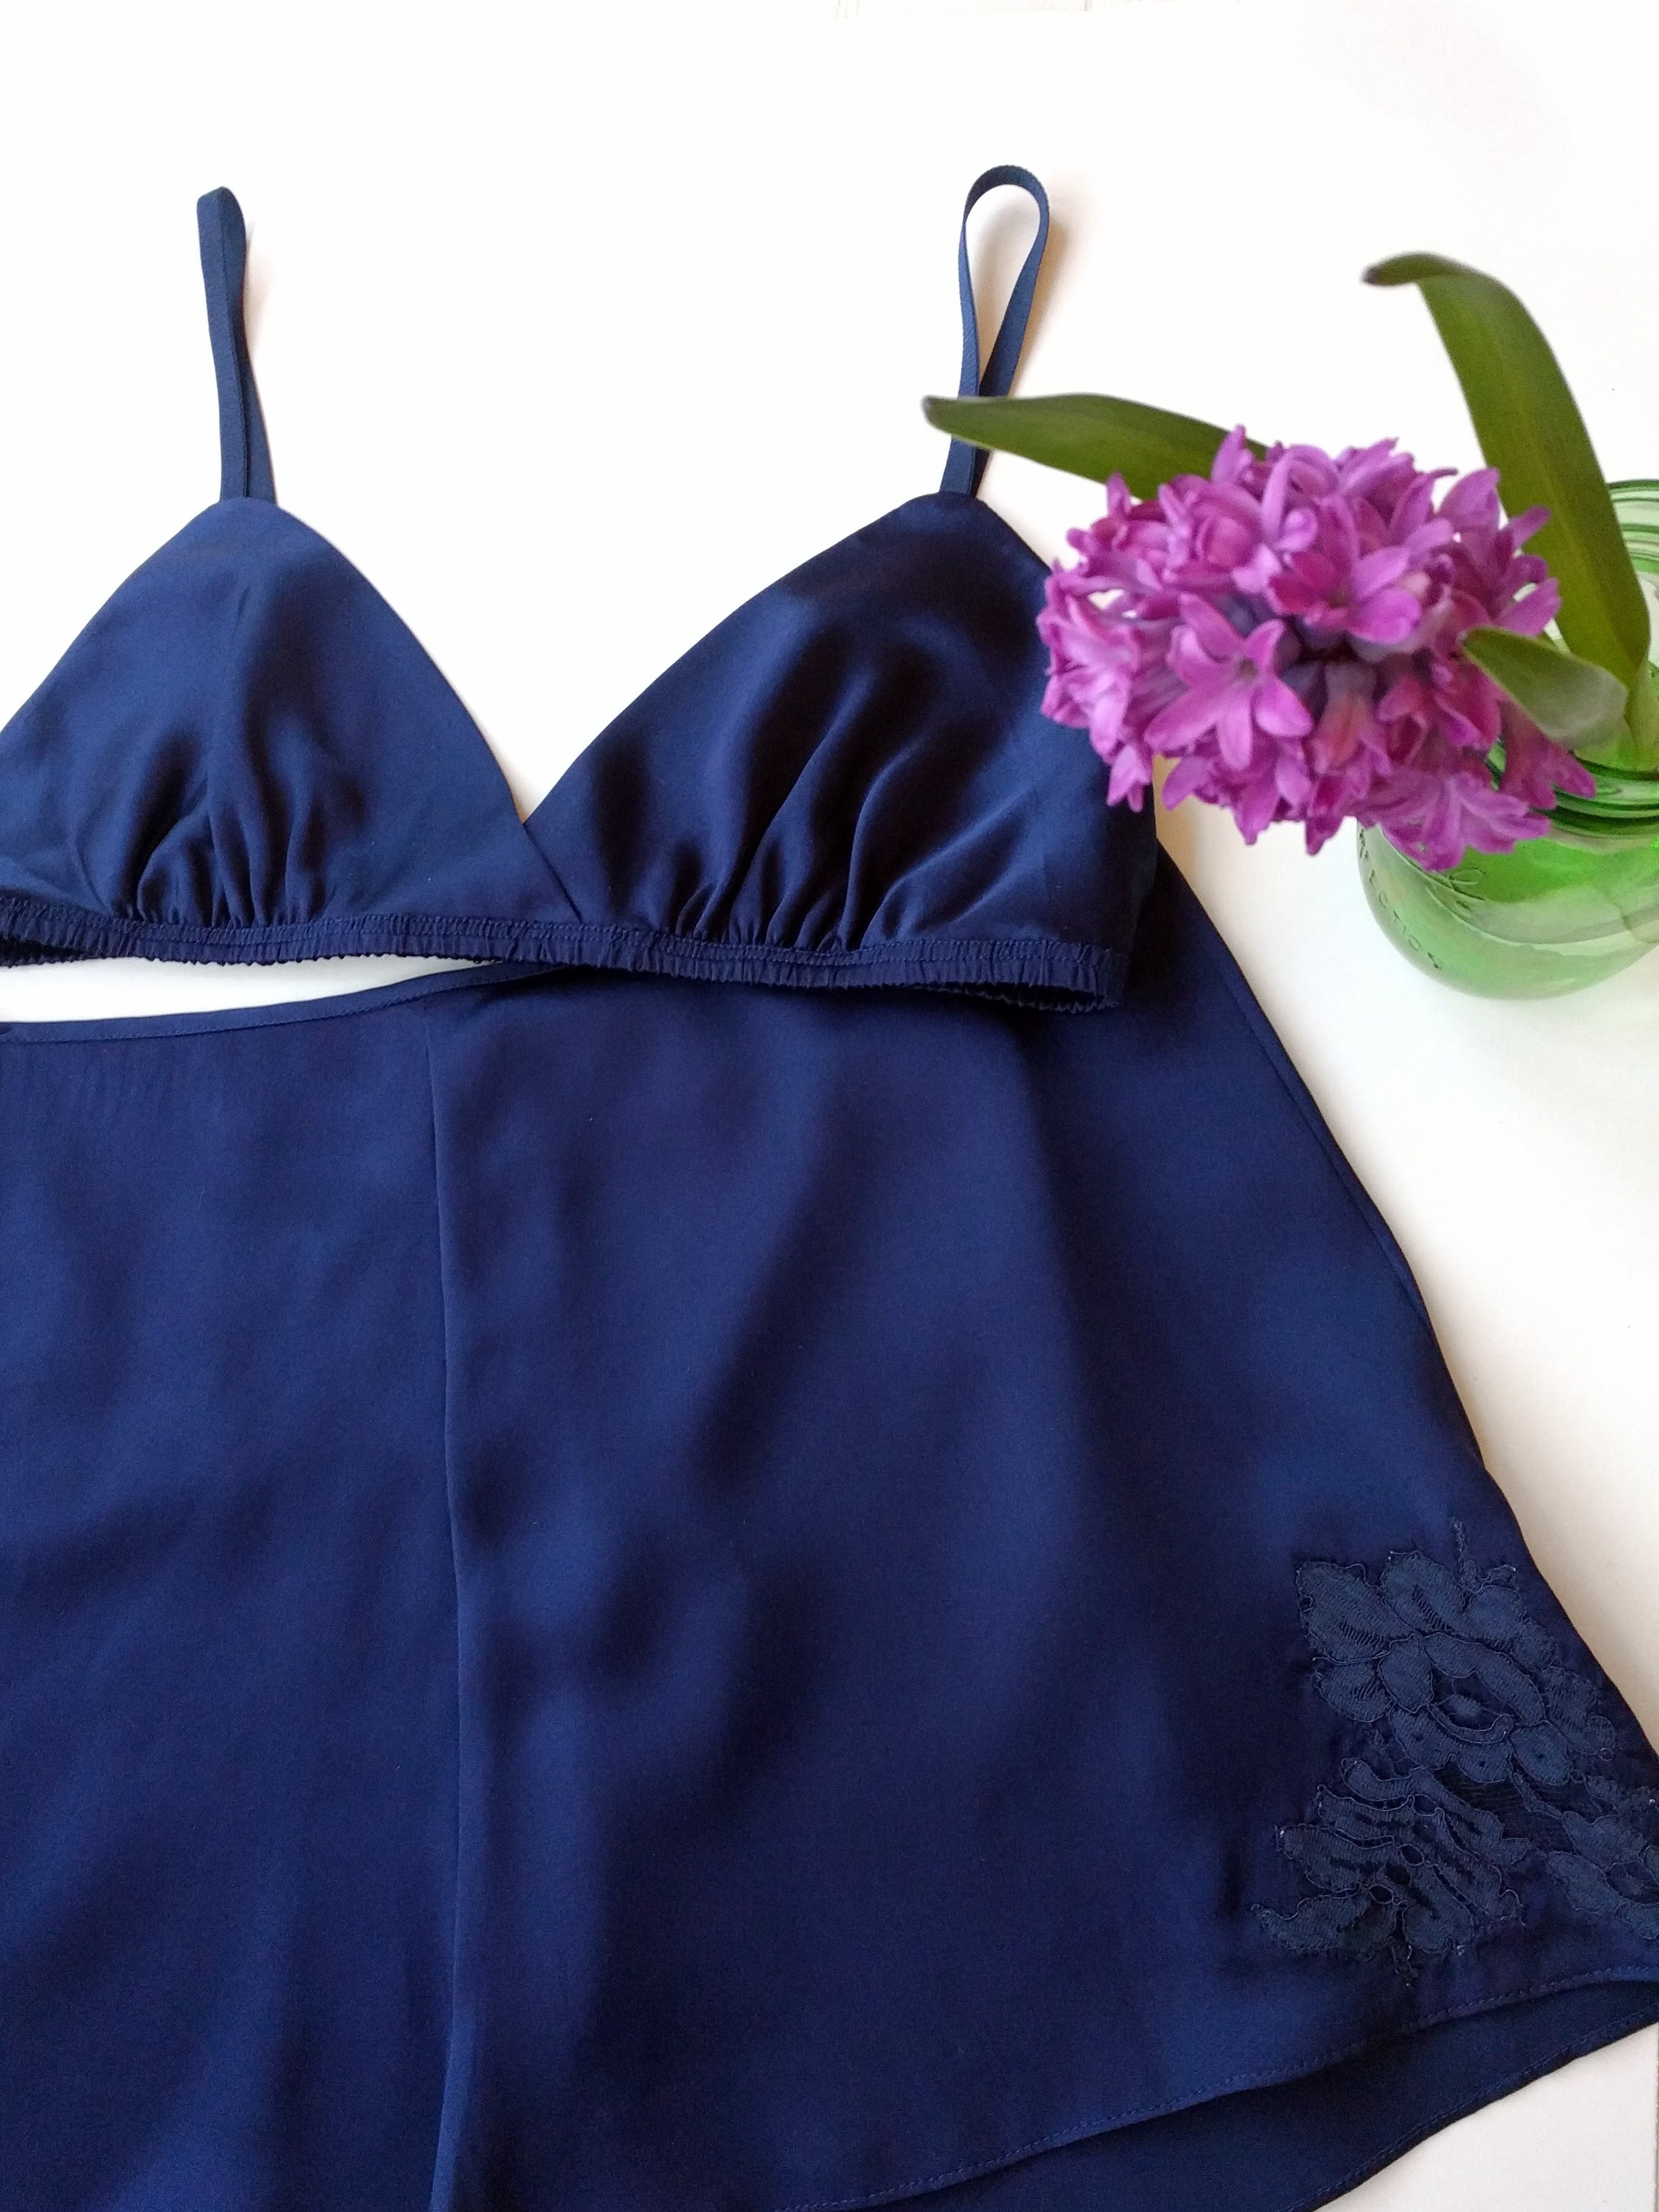 Full coverage lace bra set with high cut coordinated brief - Navy